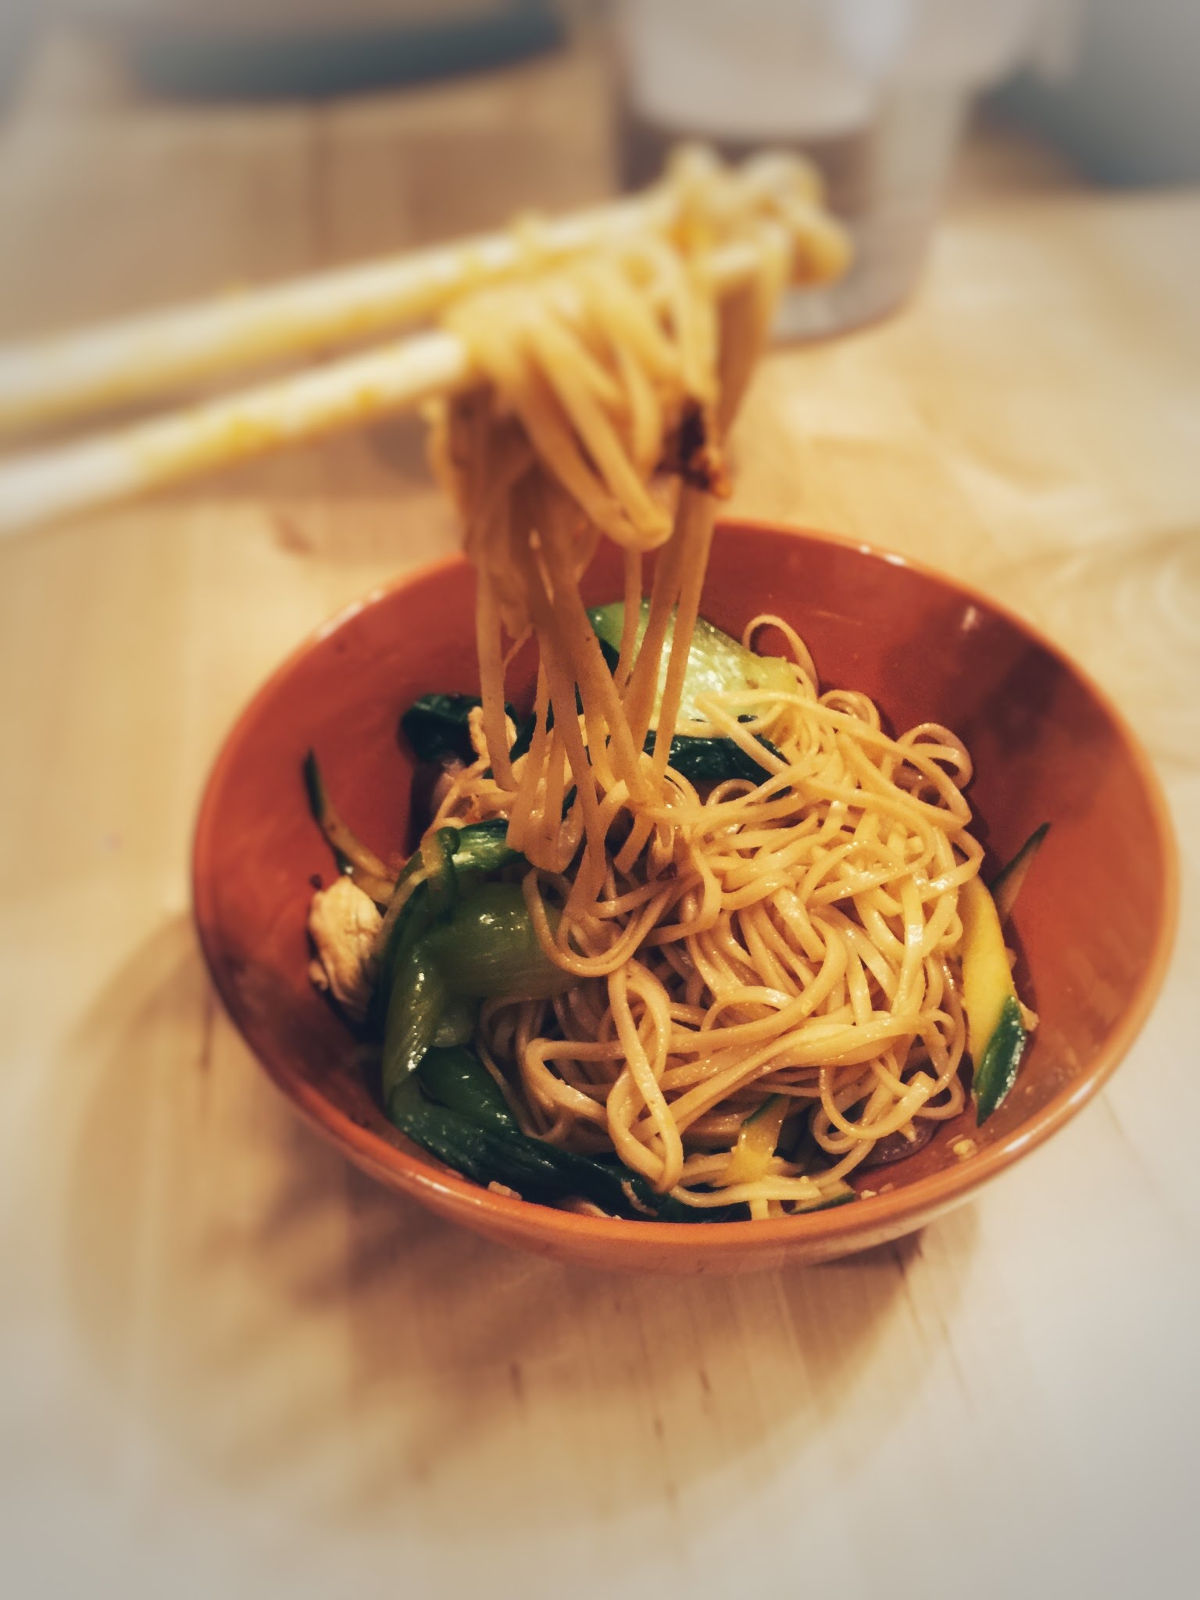 Side view of cold noodle with chicken shreds in an orange bowl, chopsticks picking up noodles.